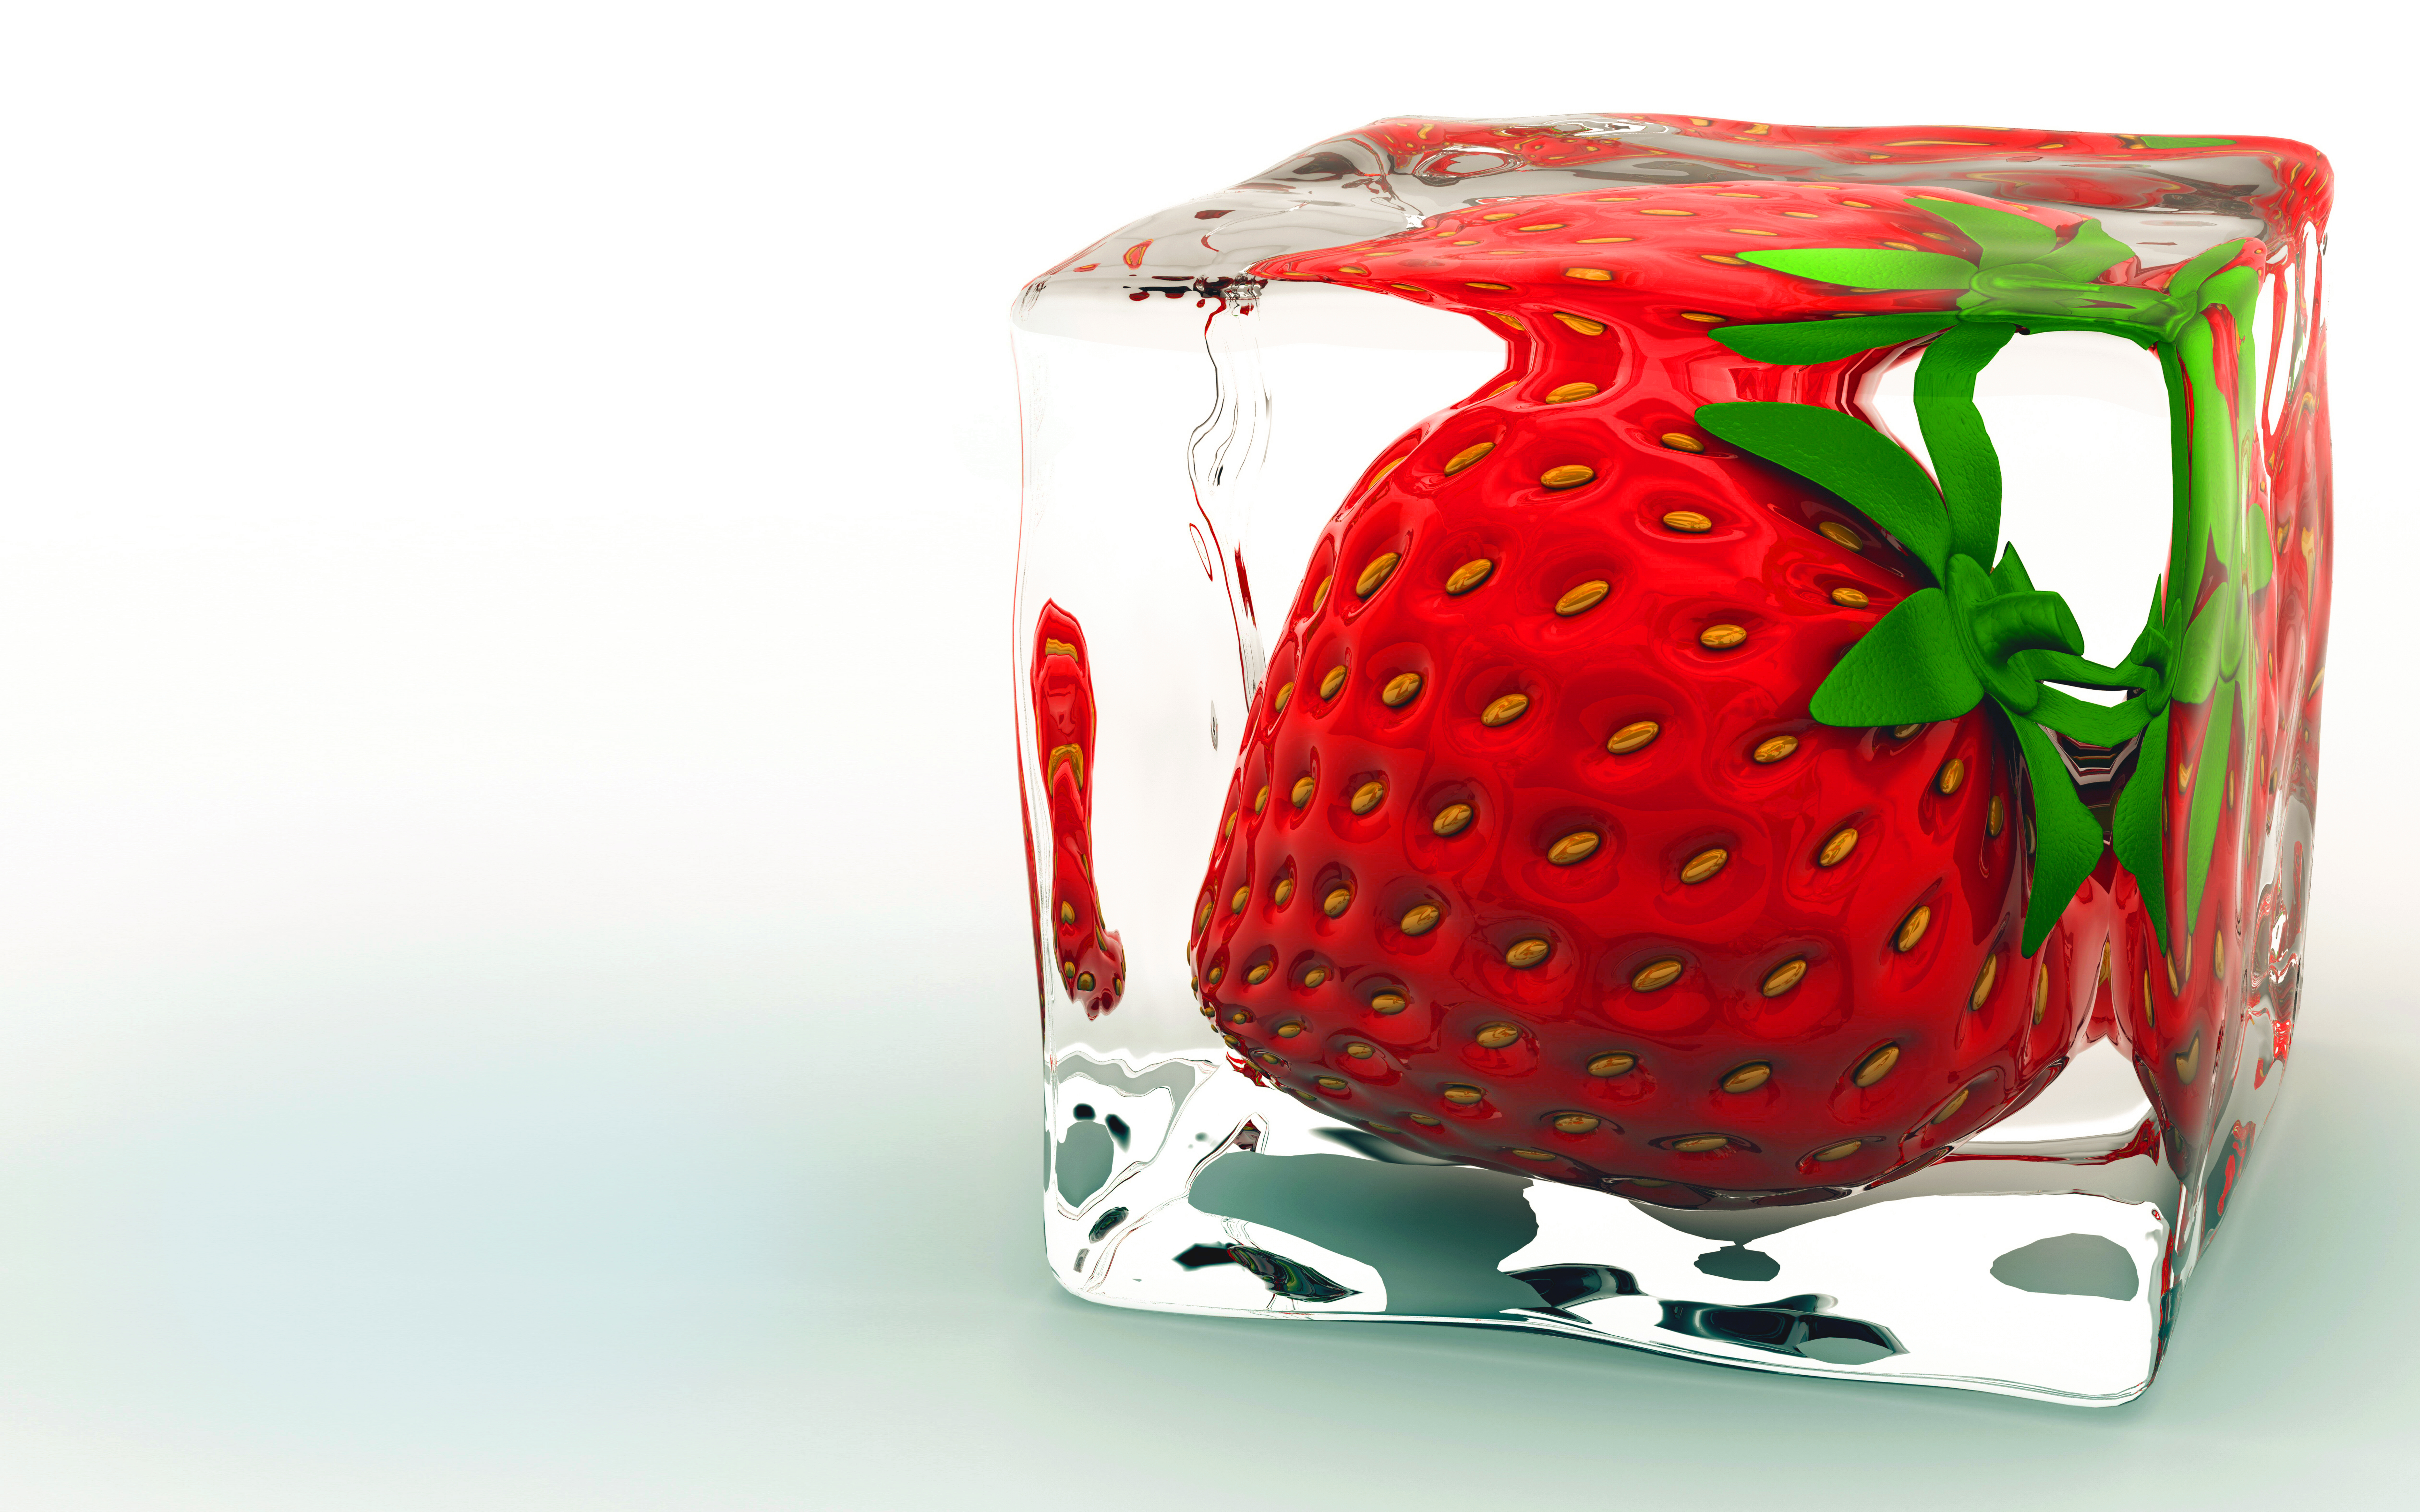 426 Strawberry HD Wallpapers Backgrounds Wallpaper Abyss